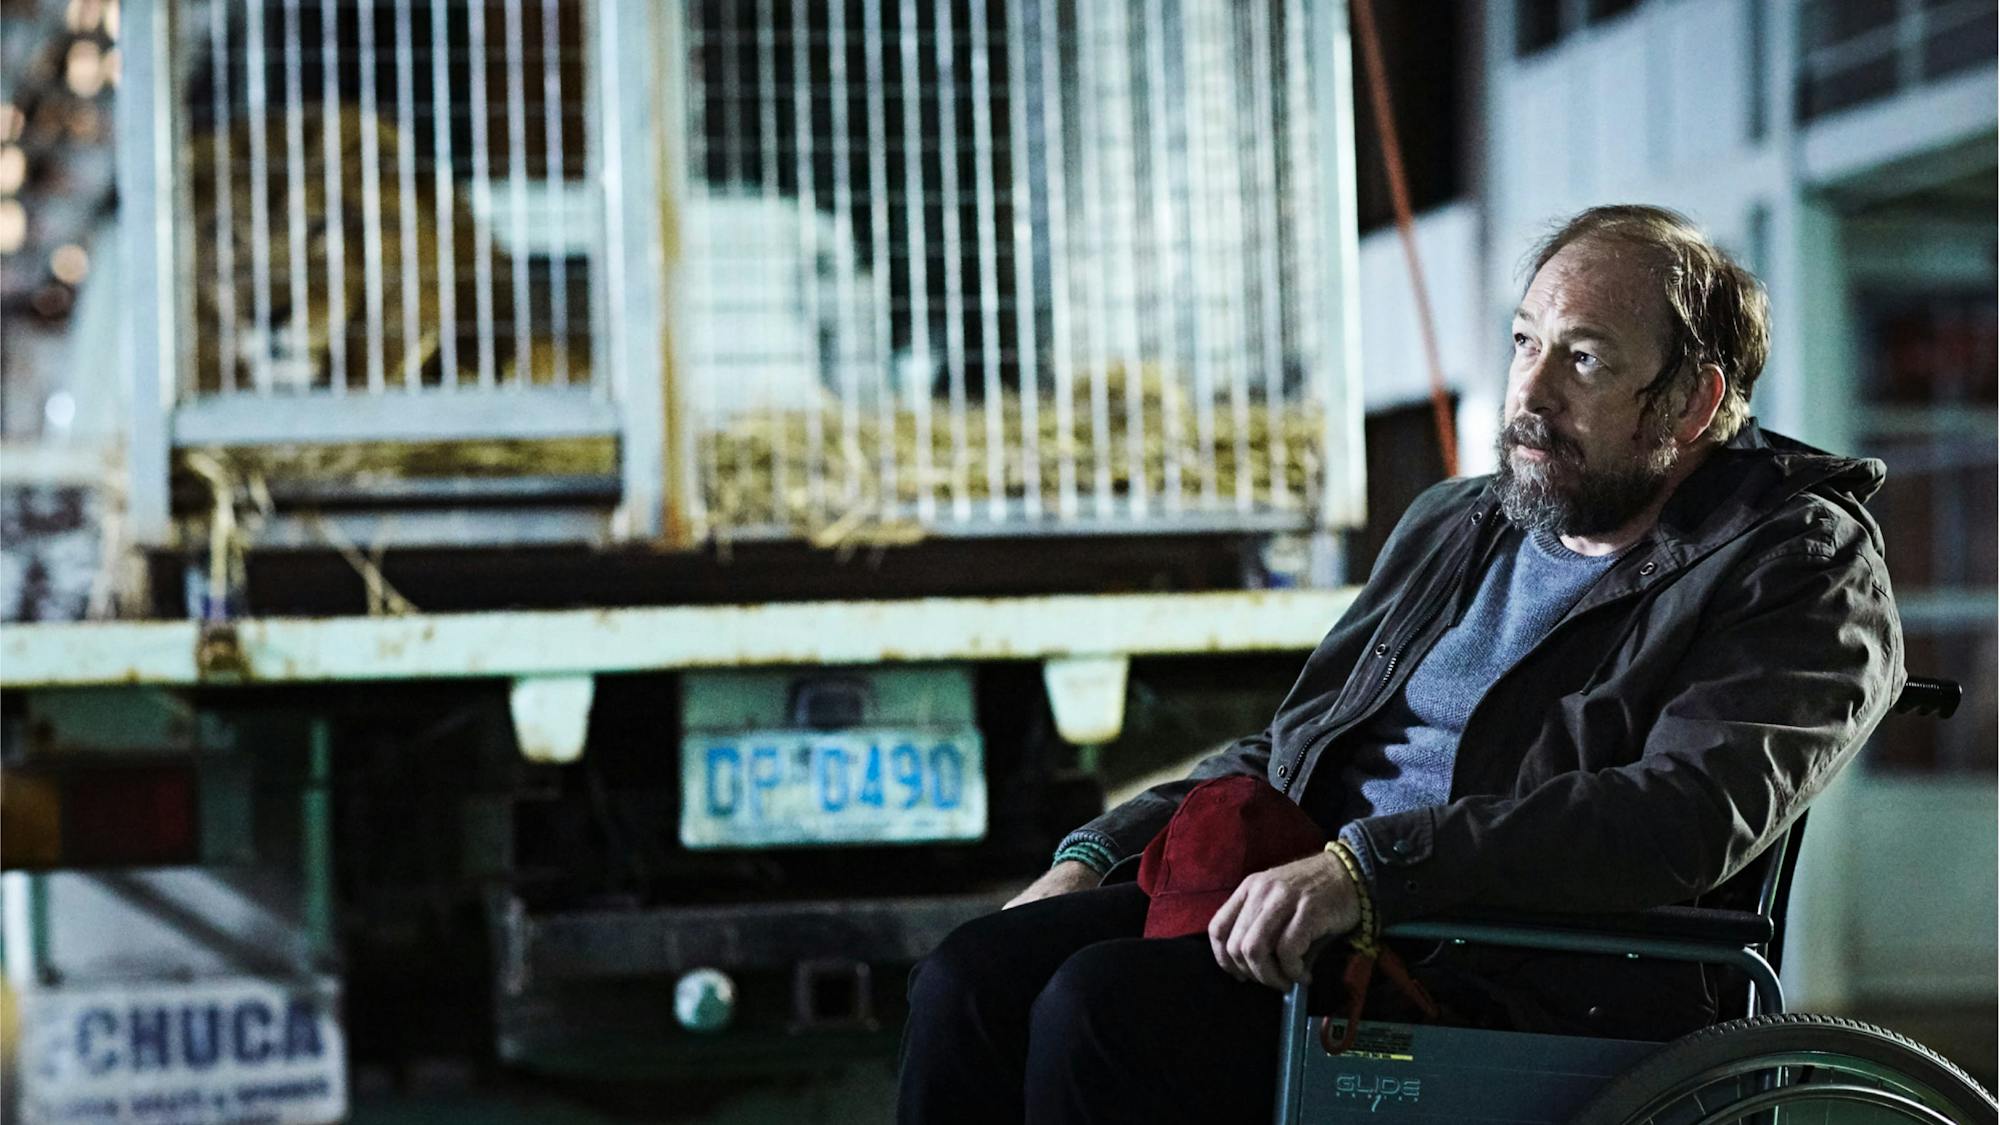 Bill Camp’s character in The Leftovers, David Burton. He wears dark clothing and a blue shirt, and sits in a wheelchair. There is some kind of truck in the background with a lisence plate that reads DP 6490.